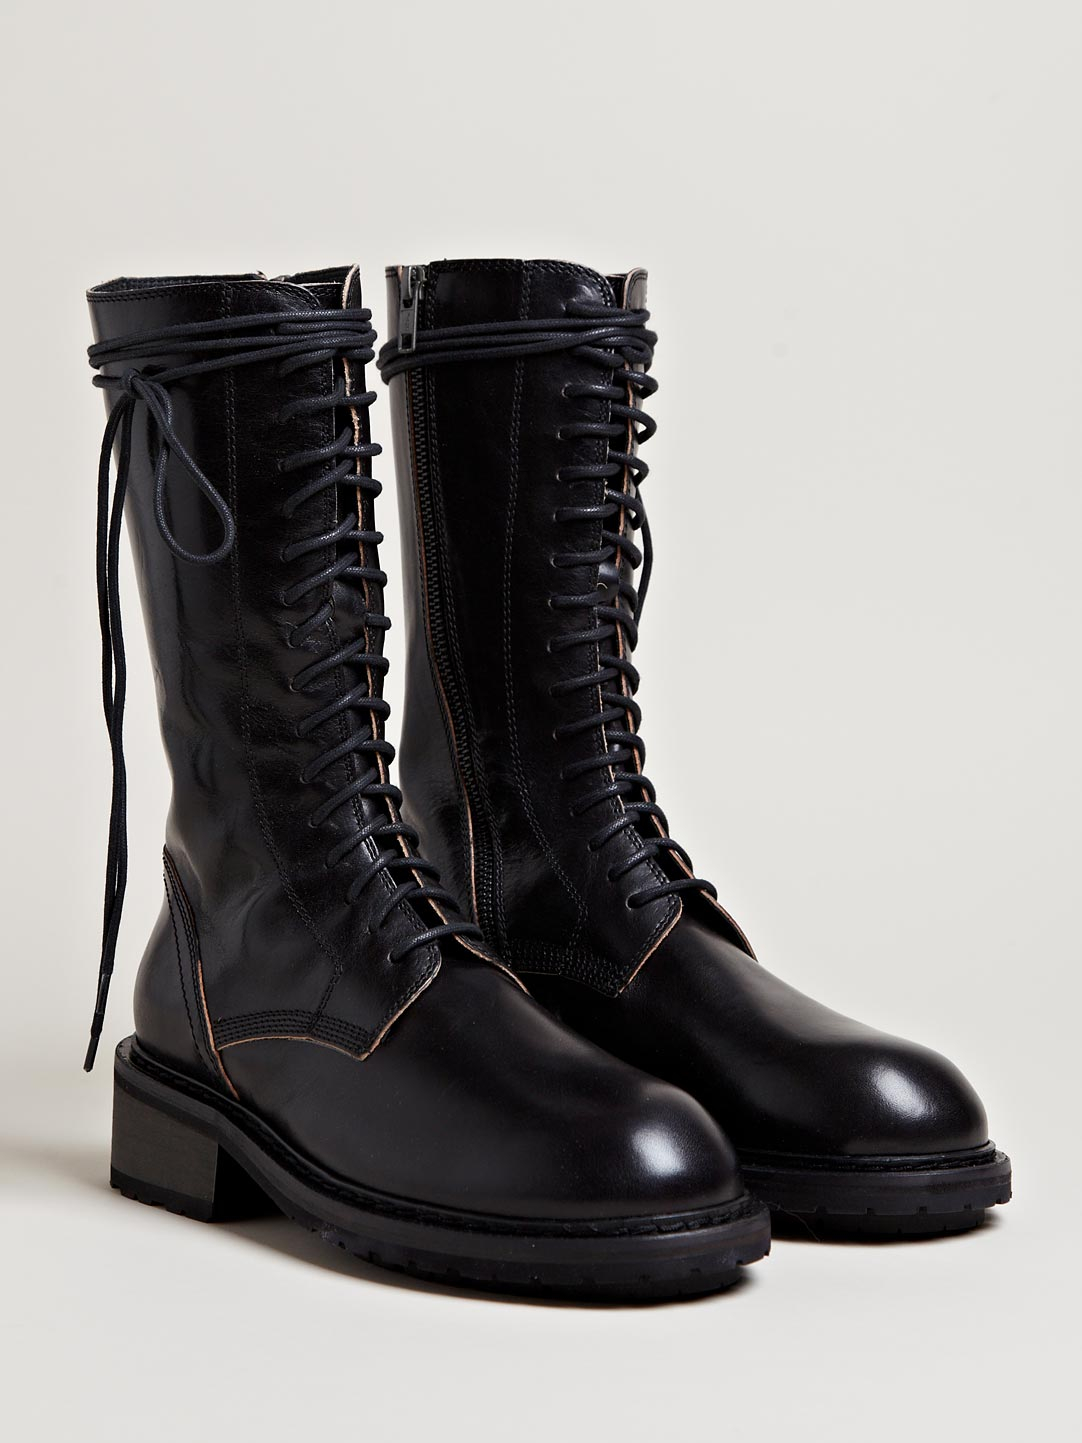 Ann Demeulemeester Womens Tamponato Mid High Boots in Black - Lyst